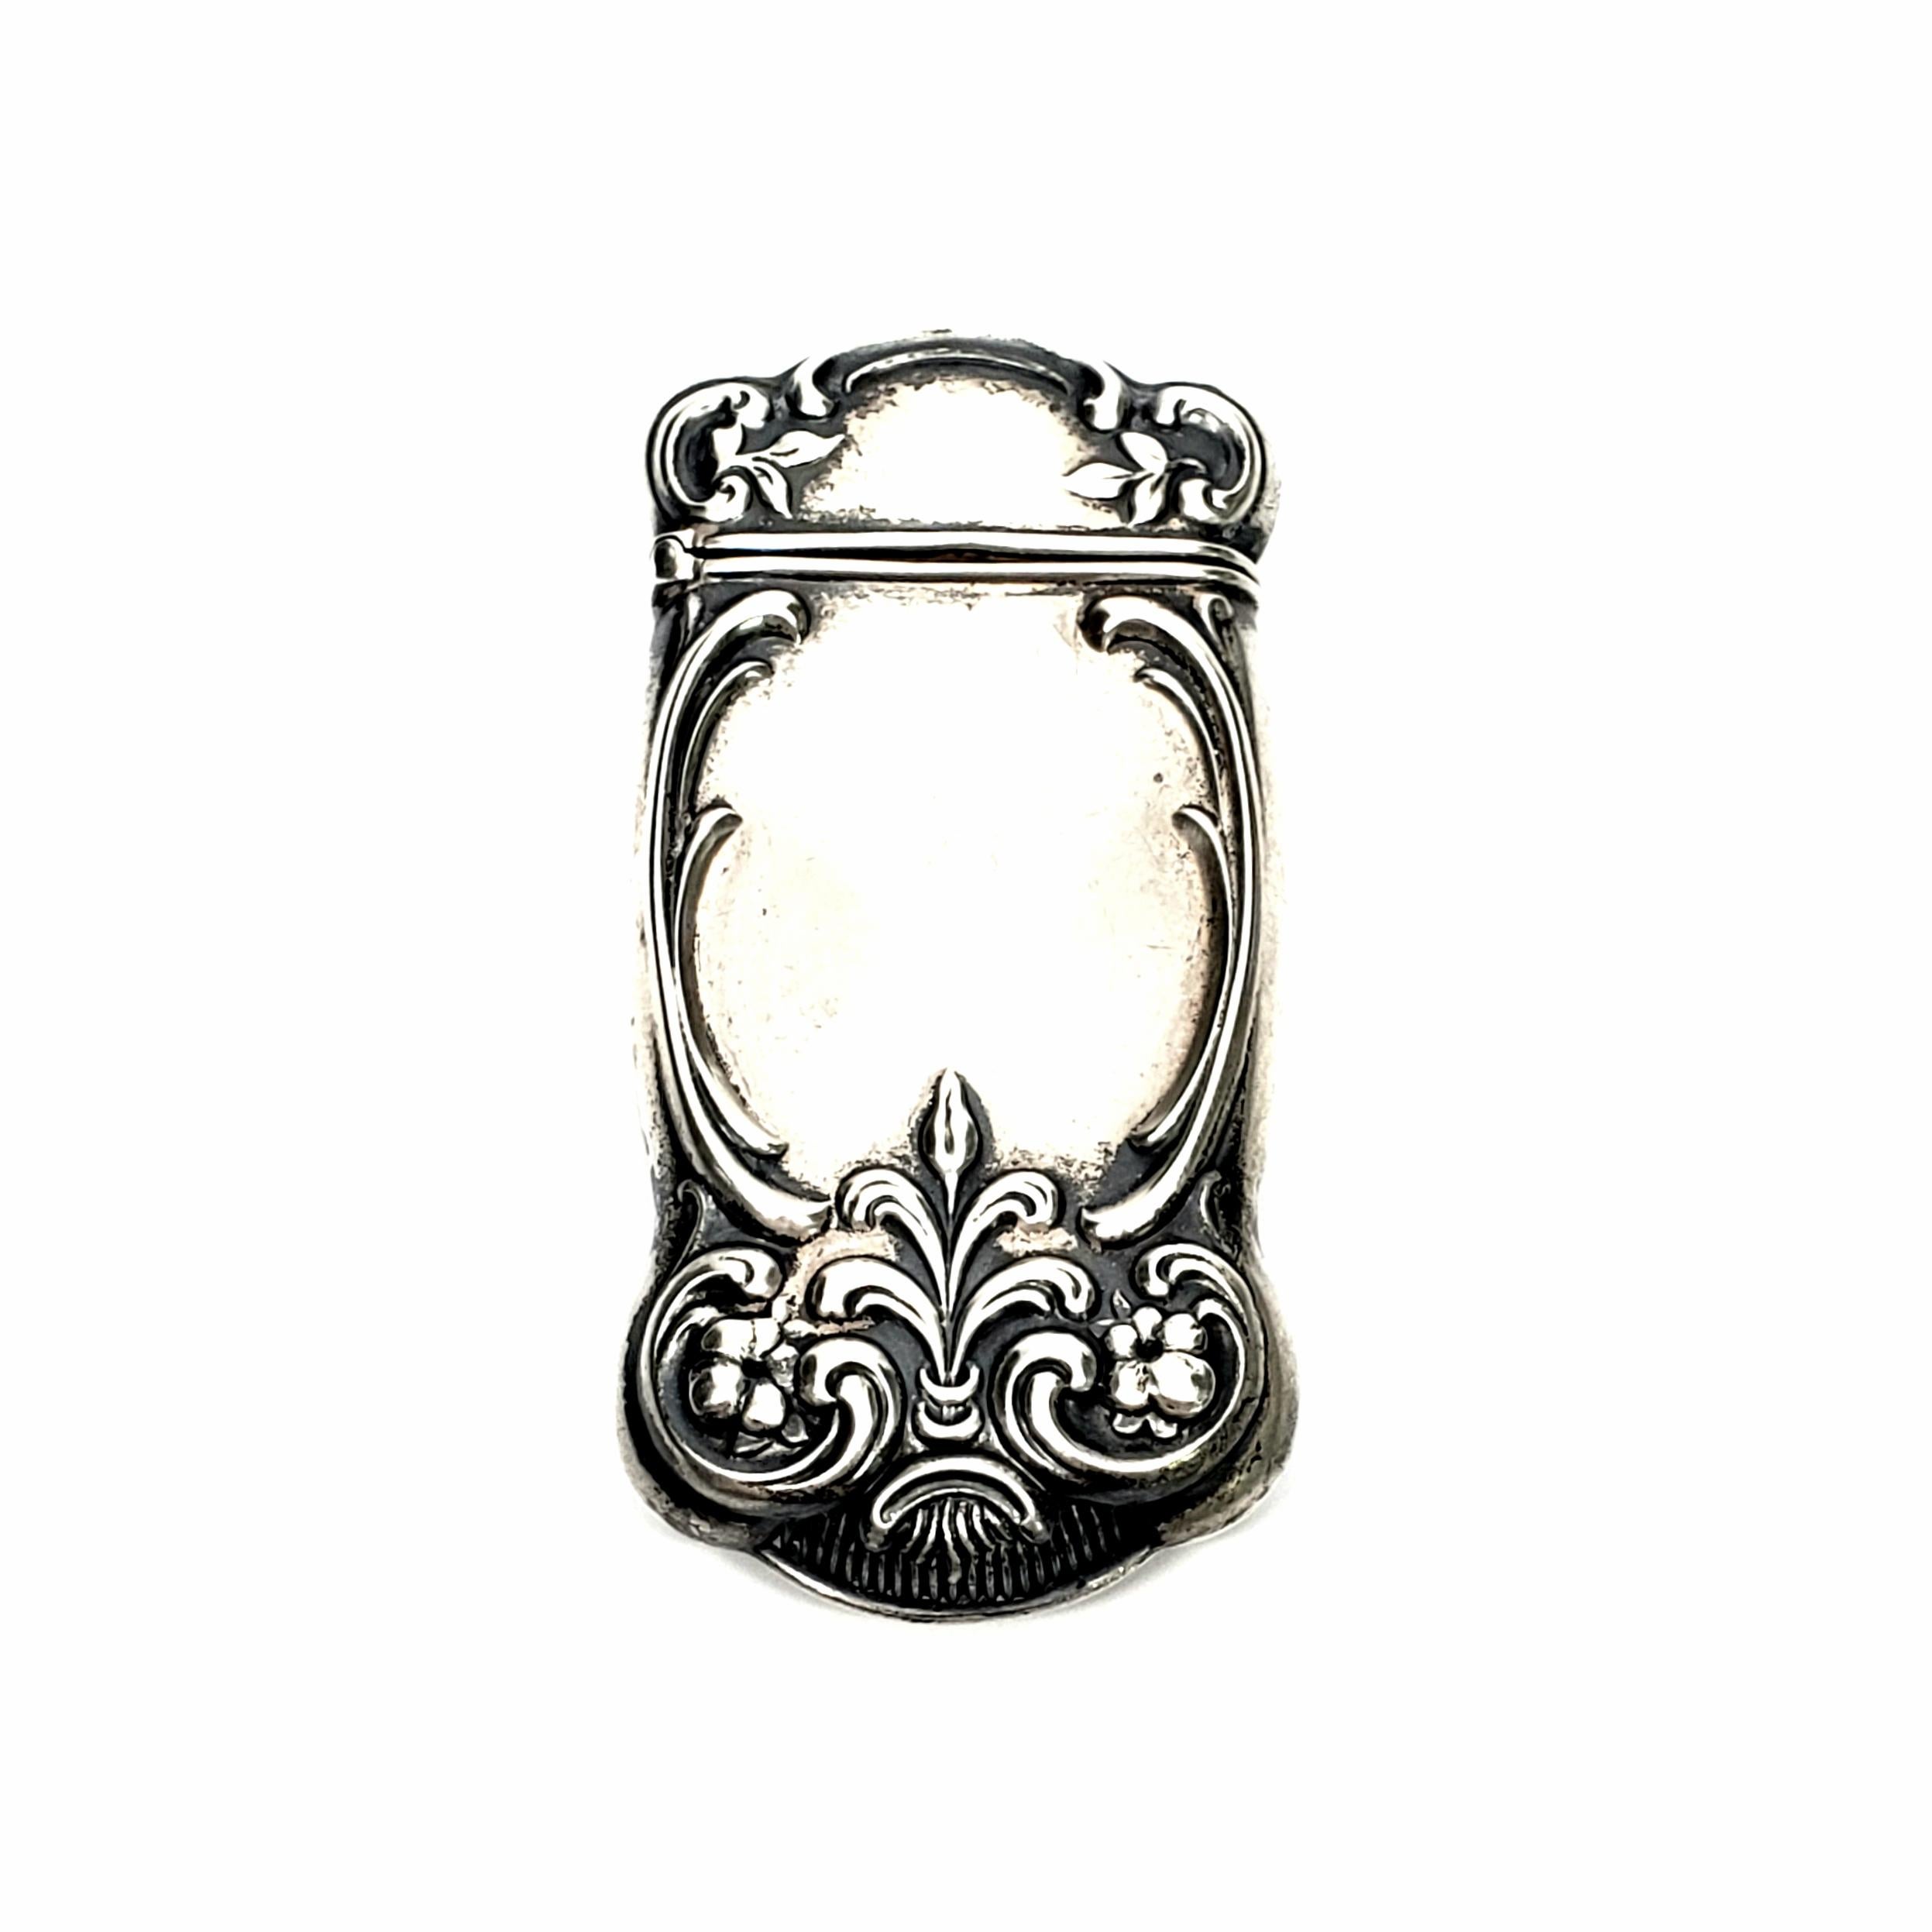 Antique sterling silver match safe/vesta case with monogram by Gorham #1170. Circa 1875-1899.

This beautiful piece features a repousse design of swirls, scrolls, small flowers and leaves. It has a well functioning hinge, and a striking surface on